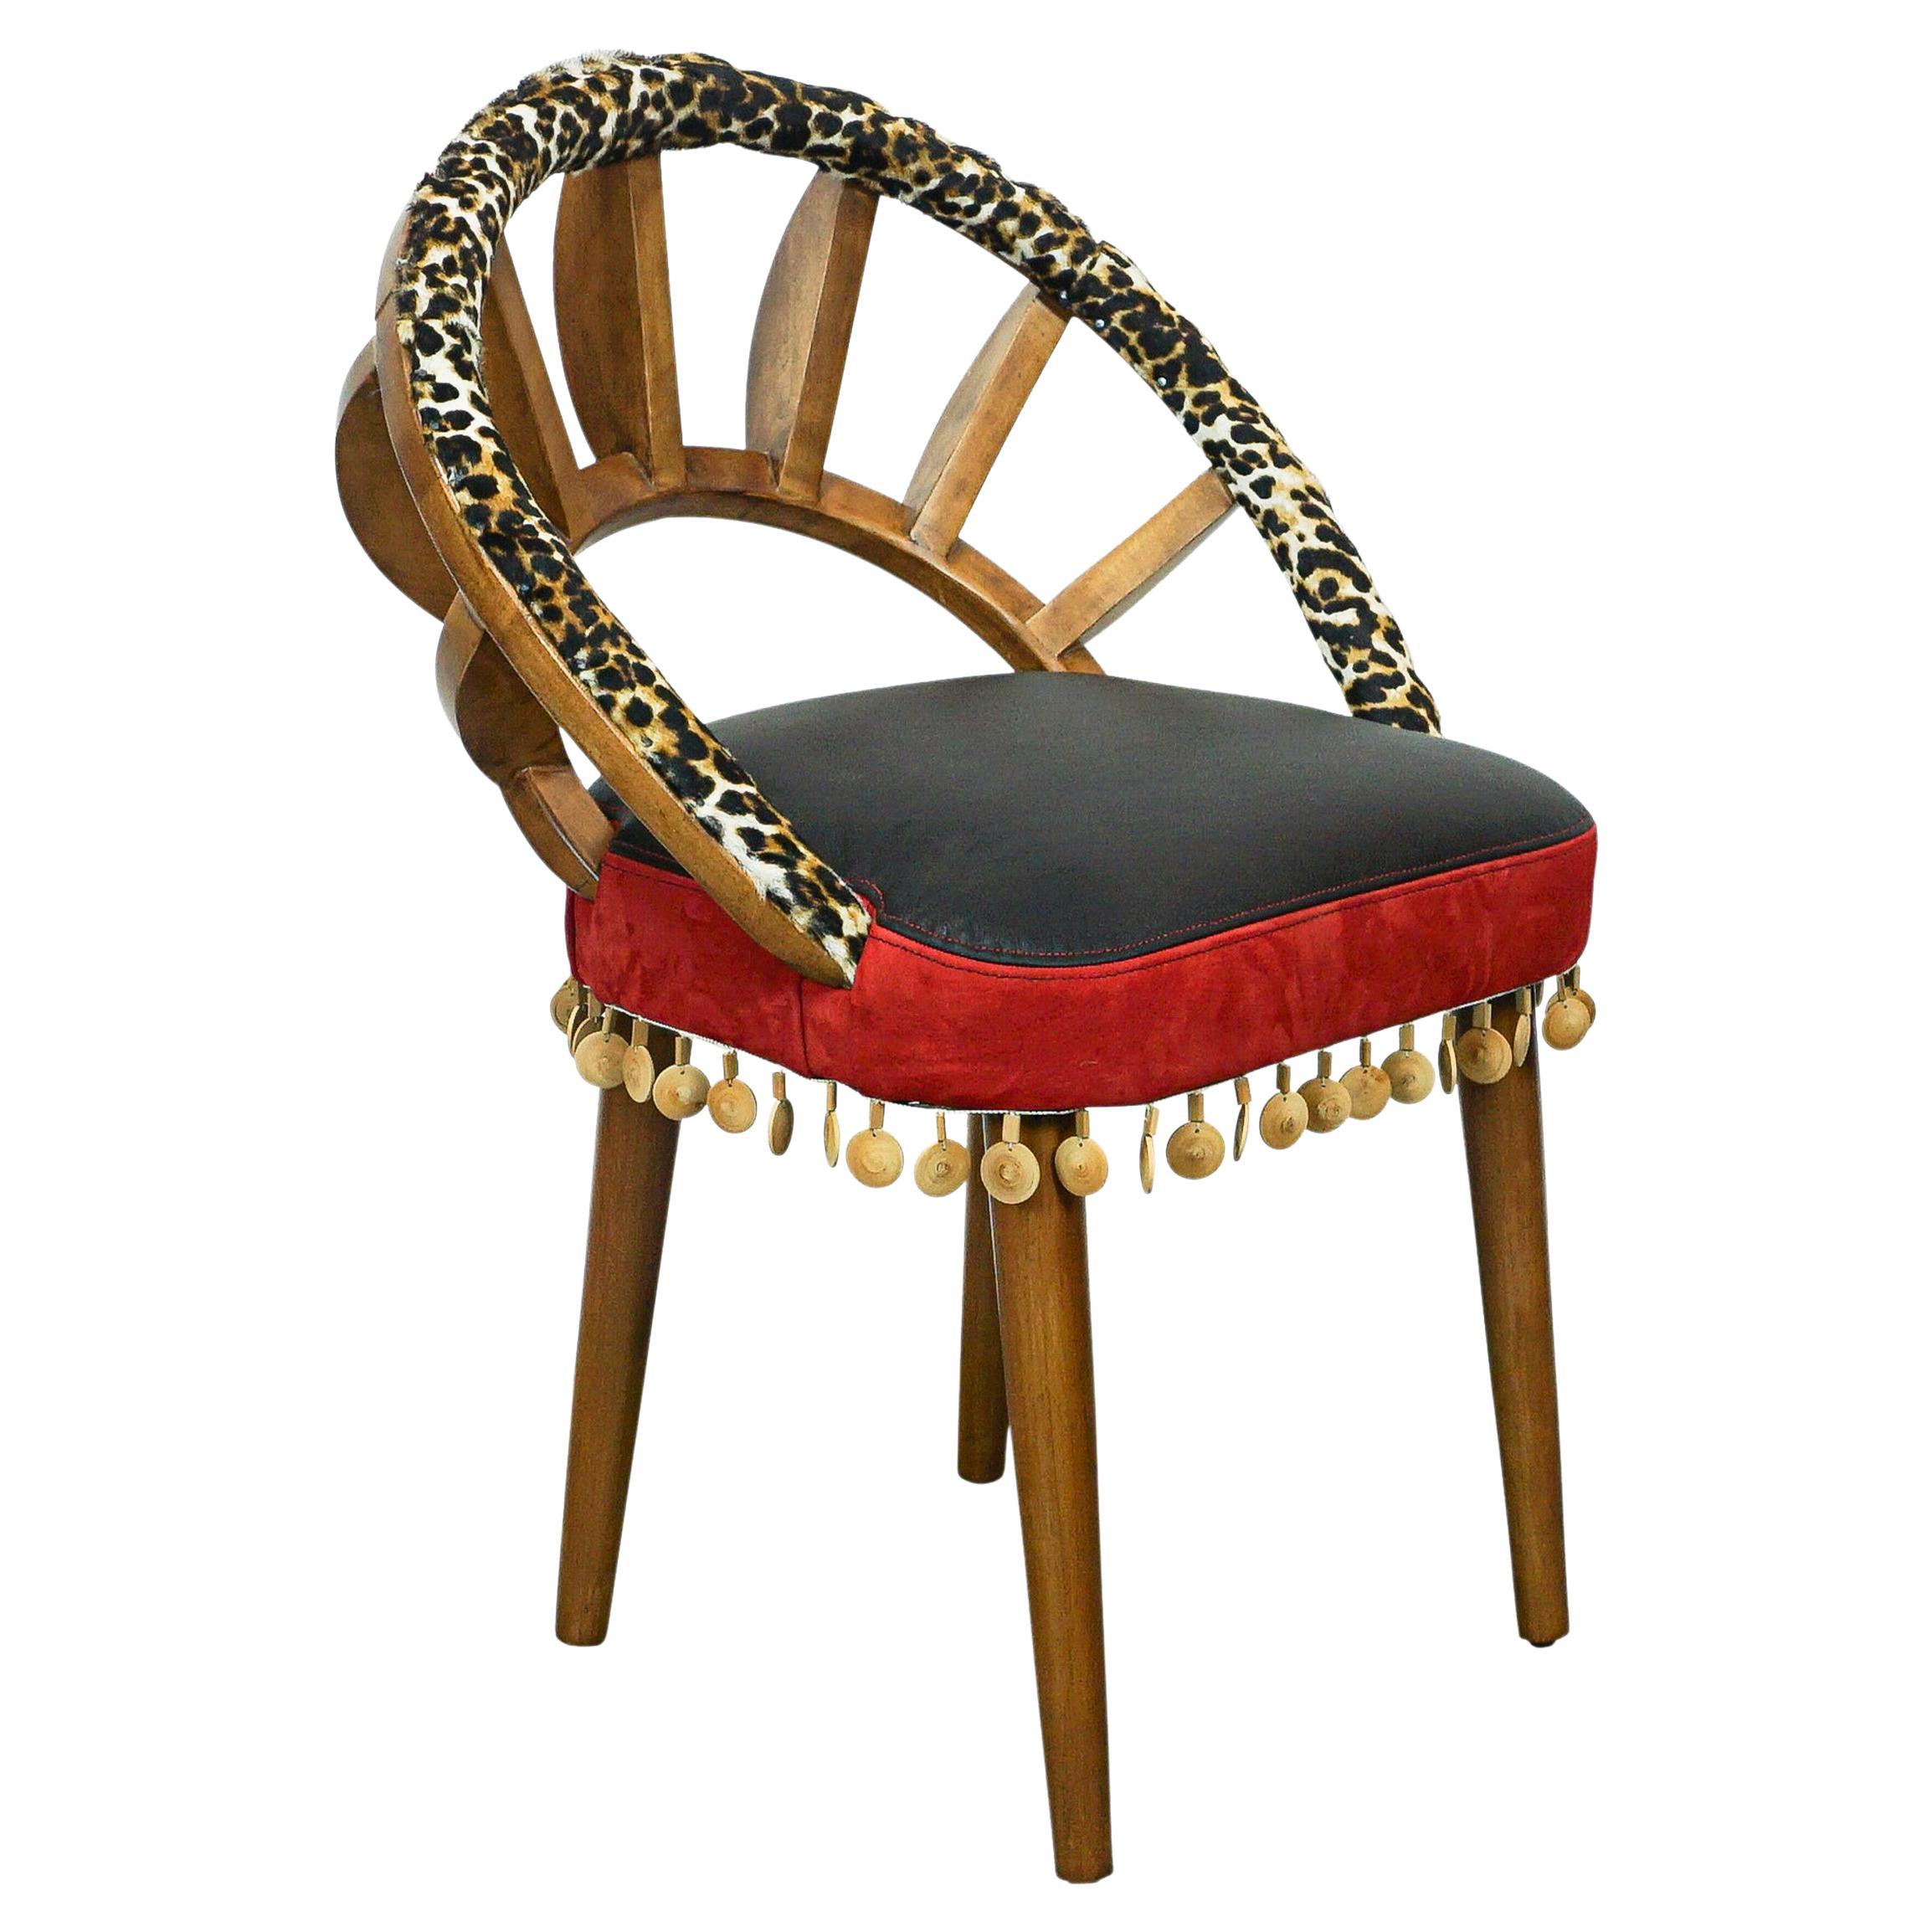 Ribbed Wood Chair with Cheetah Hair on Hide, Red + Black Leather and Wood Bead